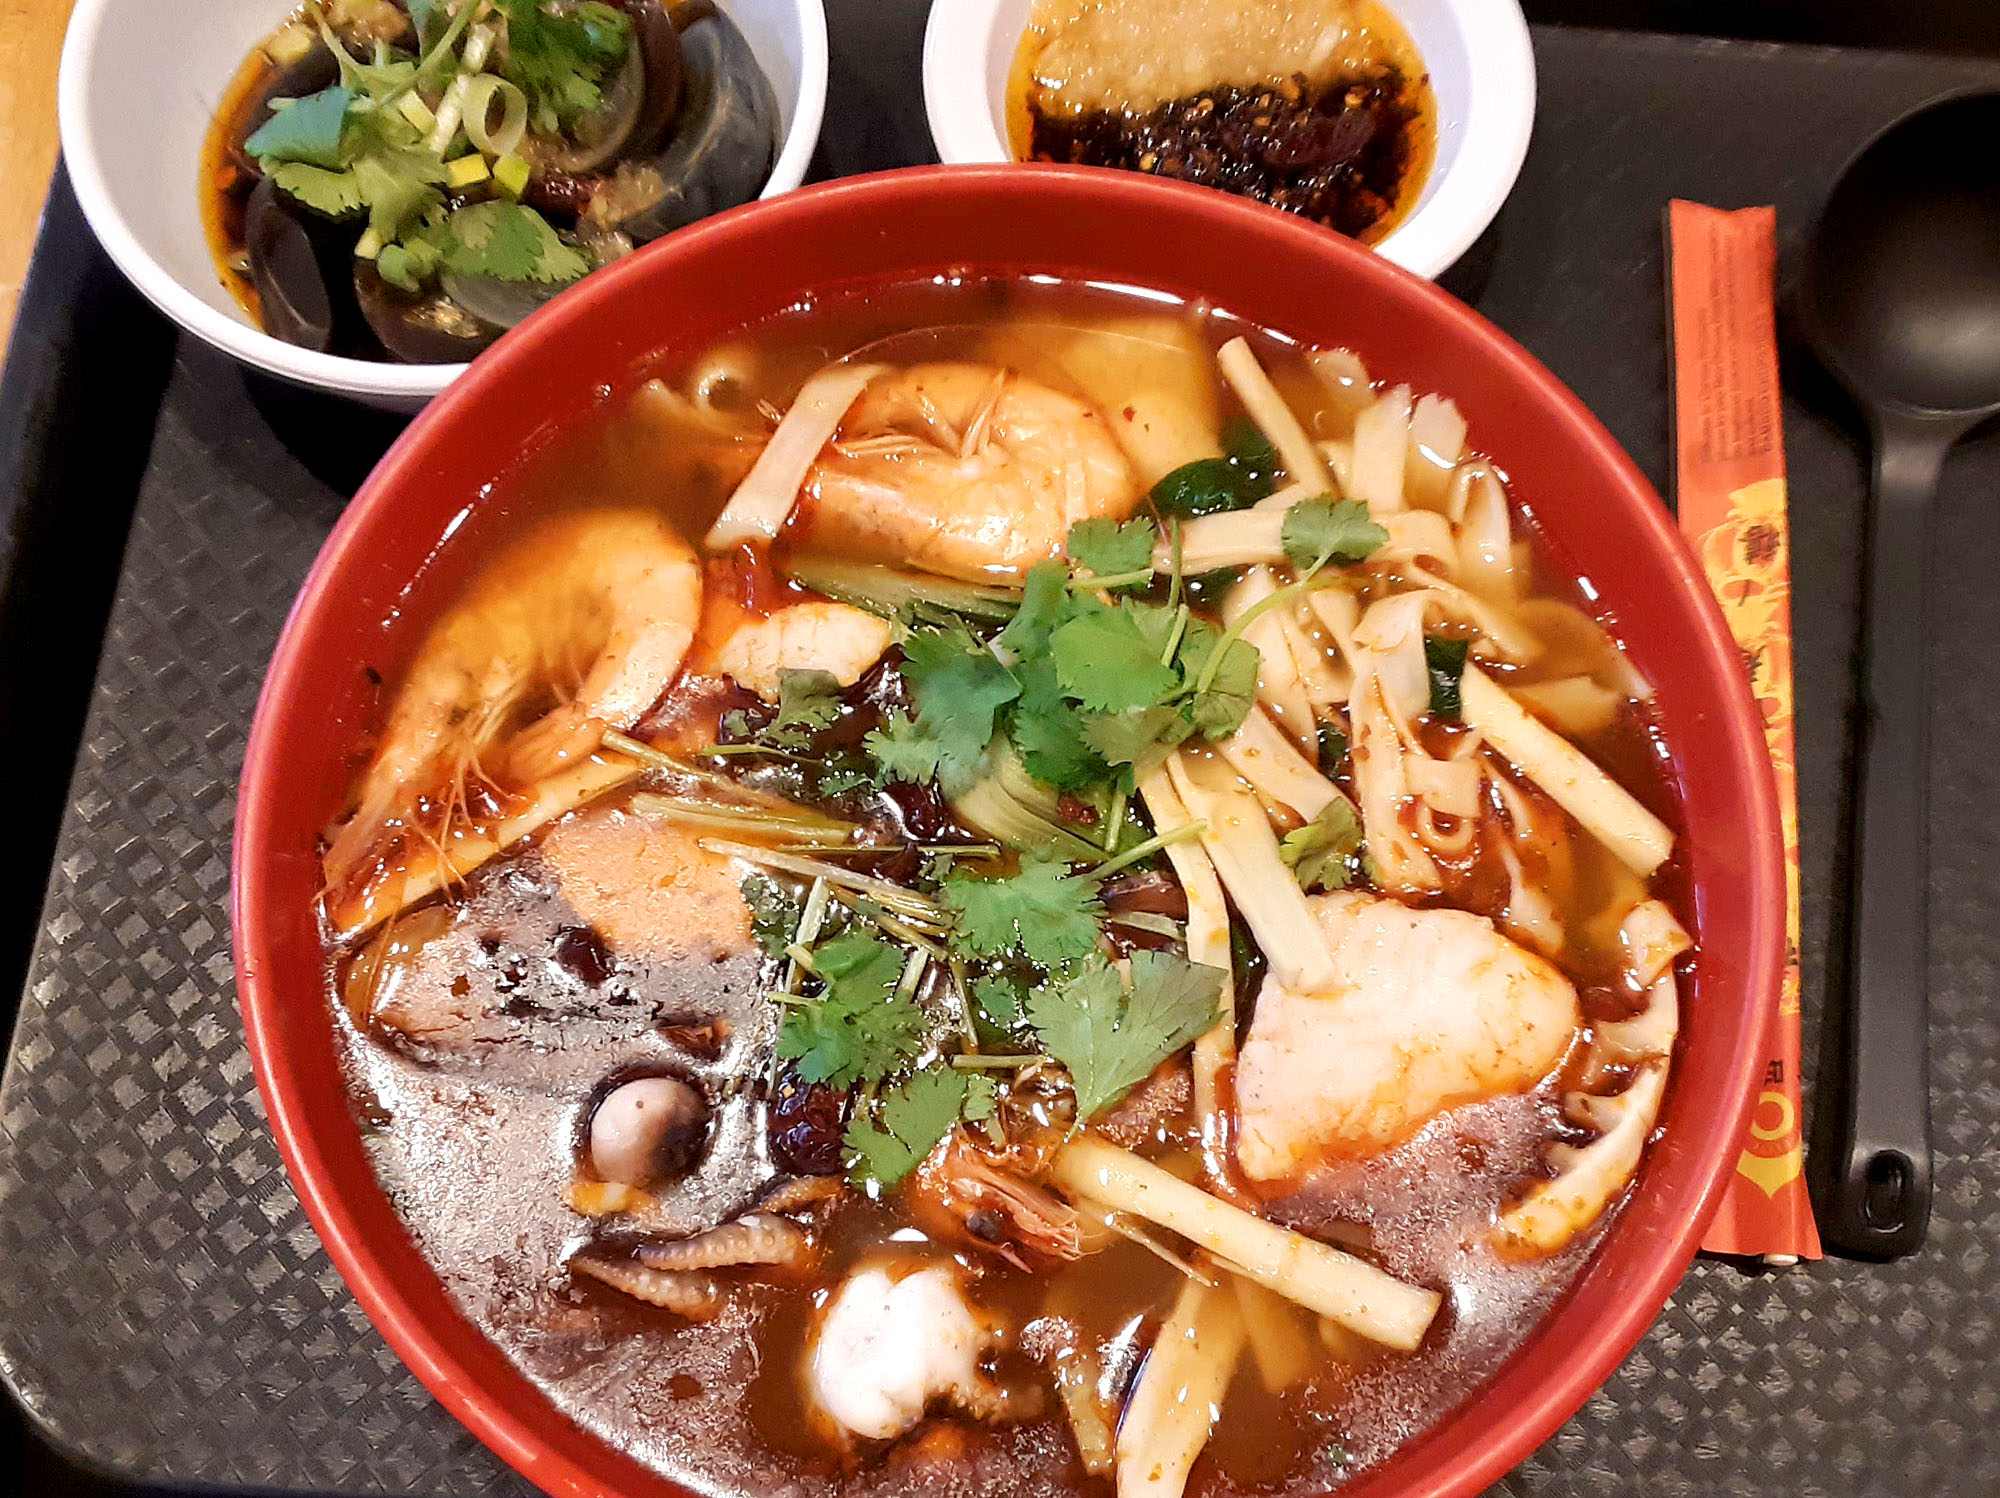 A huge bowl of seafood ramen with two small sides. Photo by Paul Young.